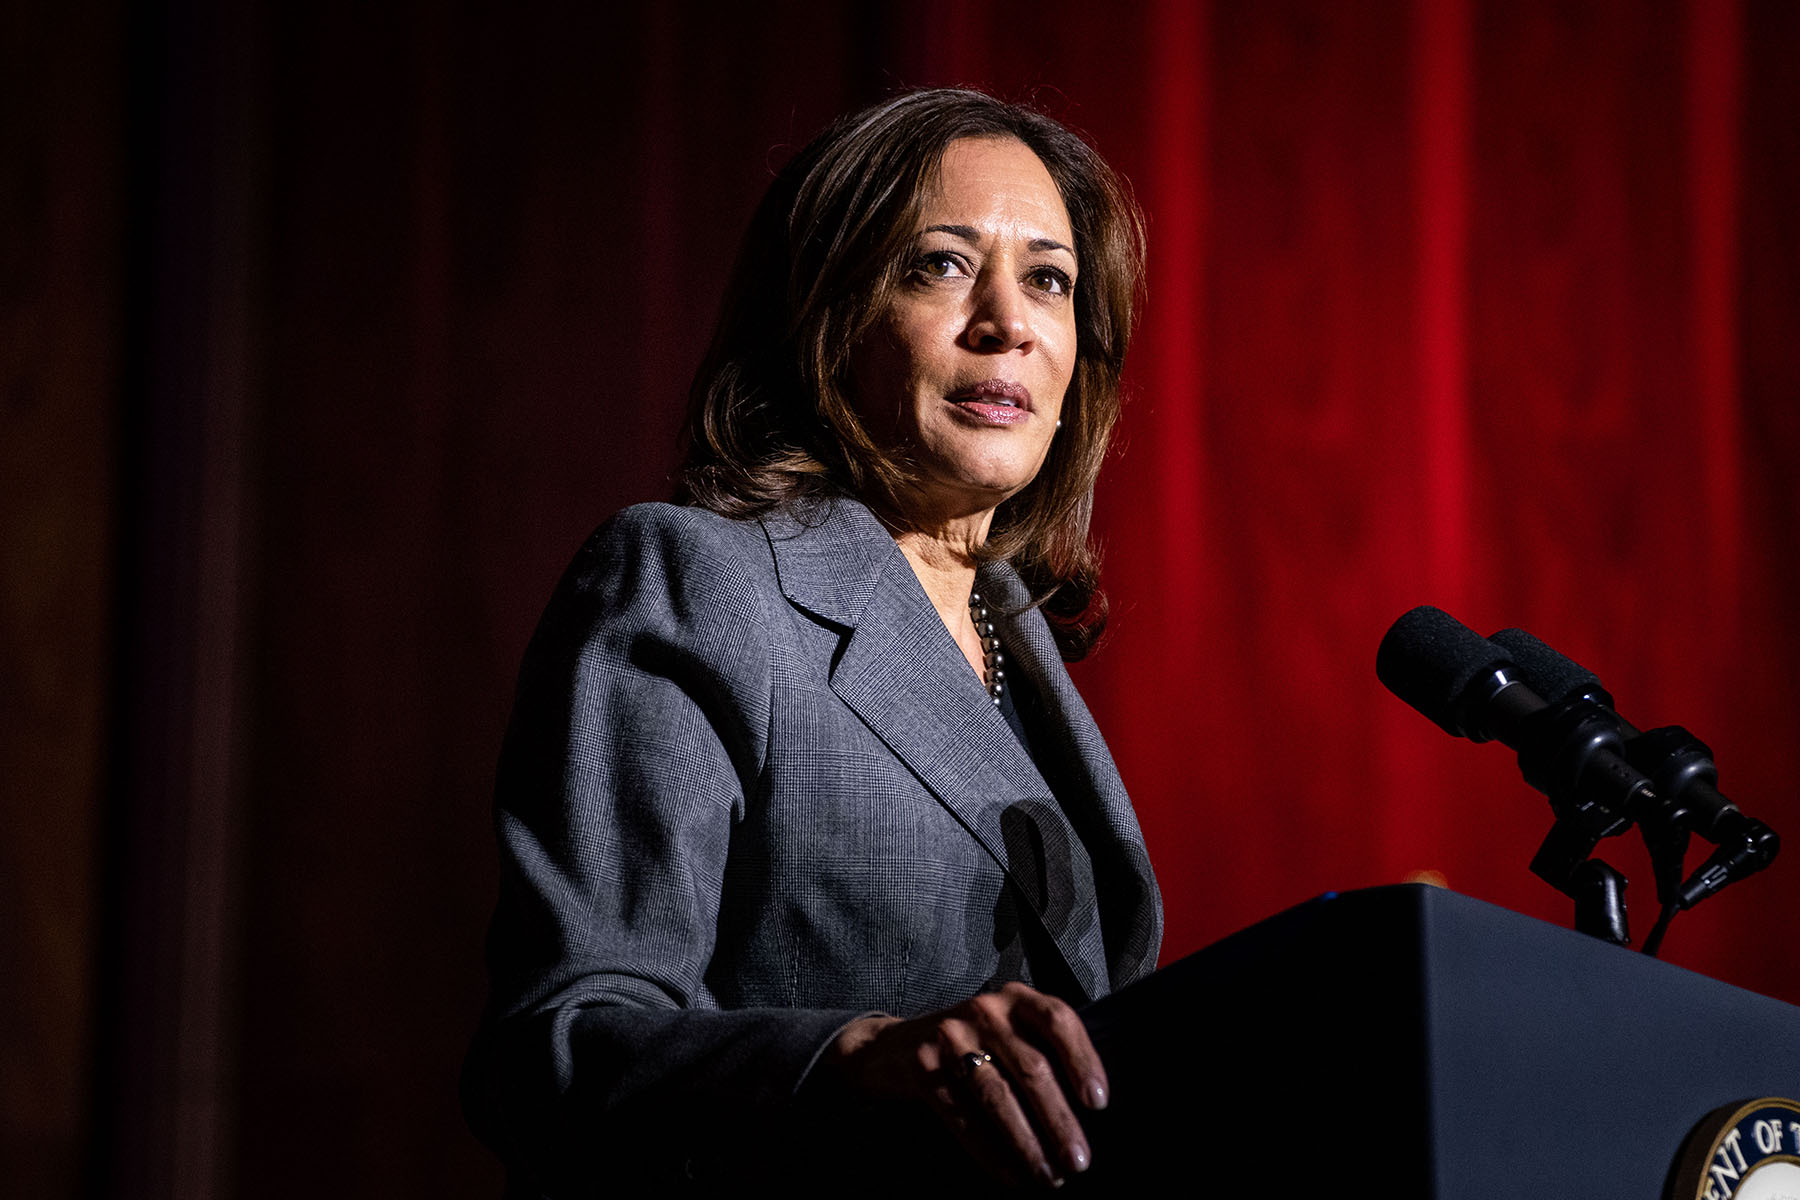 Vice President Kamala Harris delivers remarks on stage at Bowie State University.